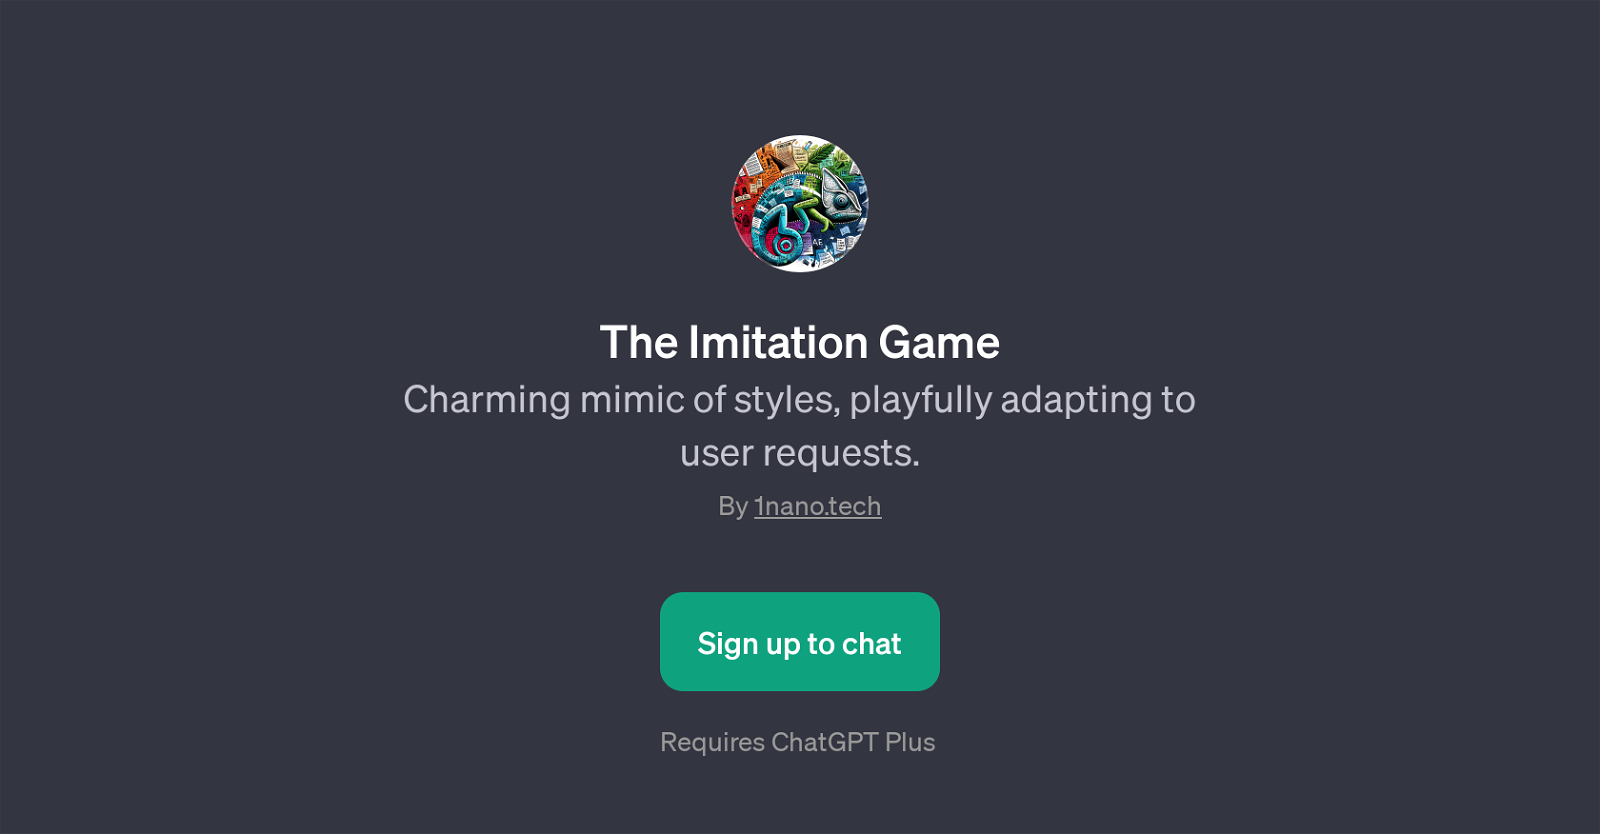 The Imitation Game website